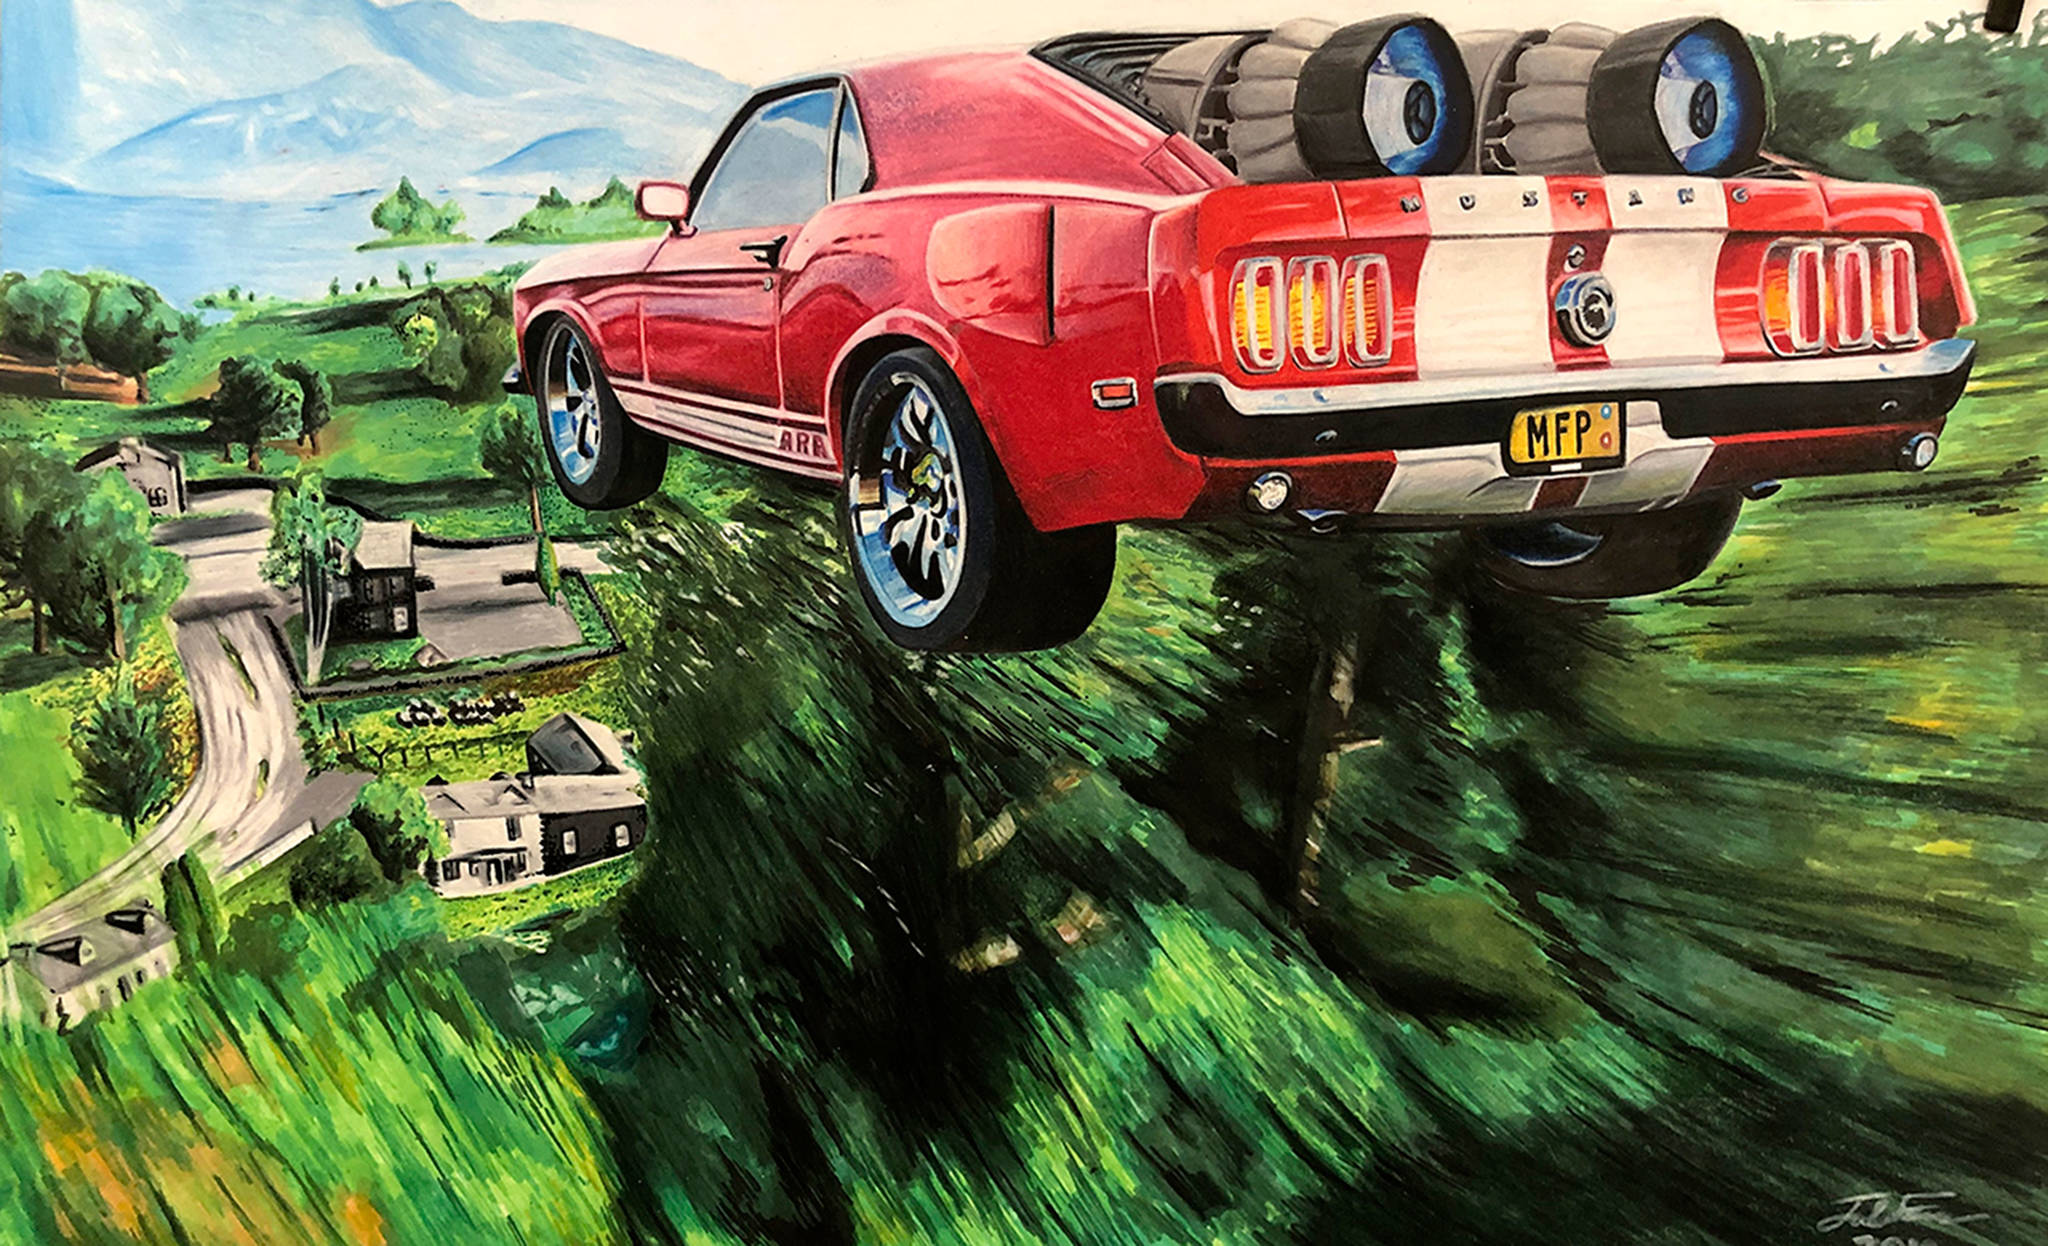 (Courtesy photo) “Ford Mustang with Jet Engines” by Joshua Allen Farrar, a student at Aberdeen High School.